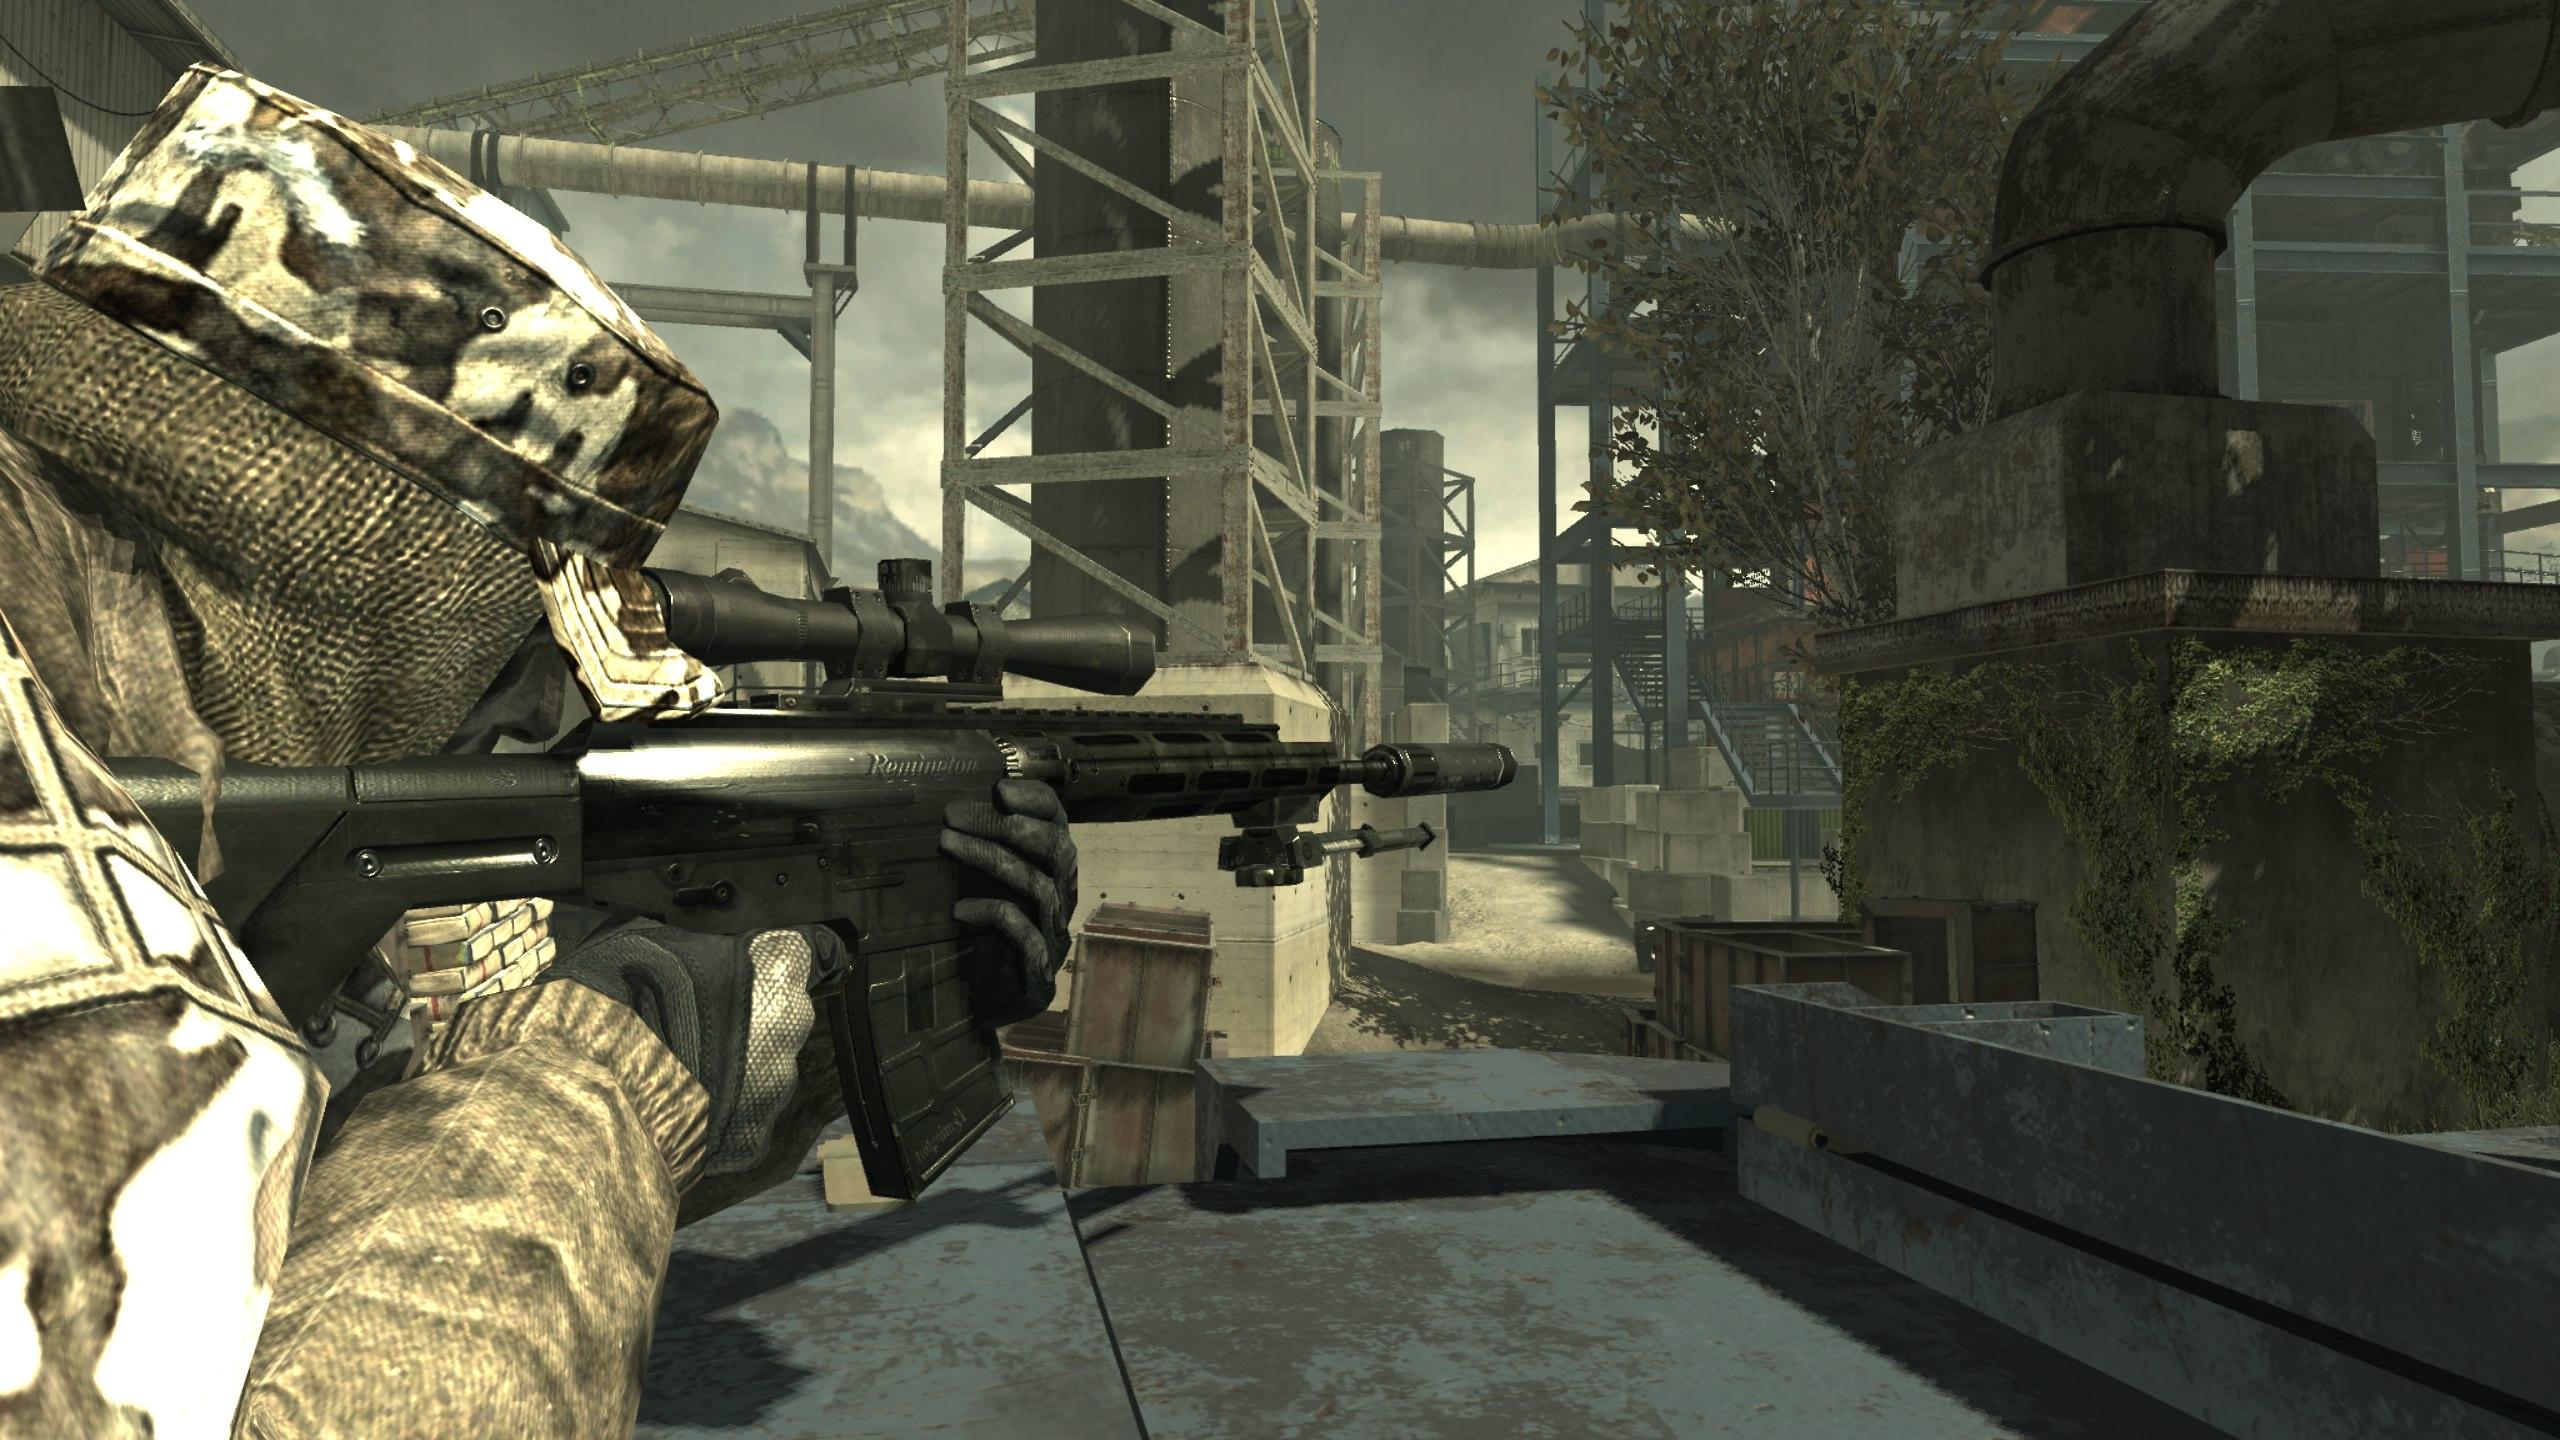 Call of Duty: Modern Warfare 3 screenshots, image and picture